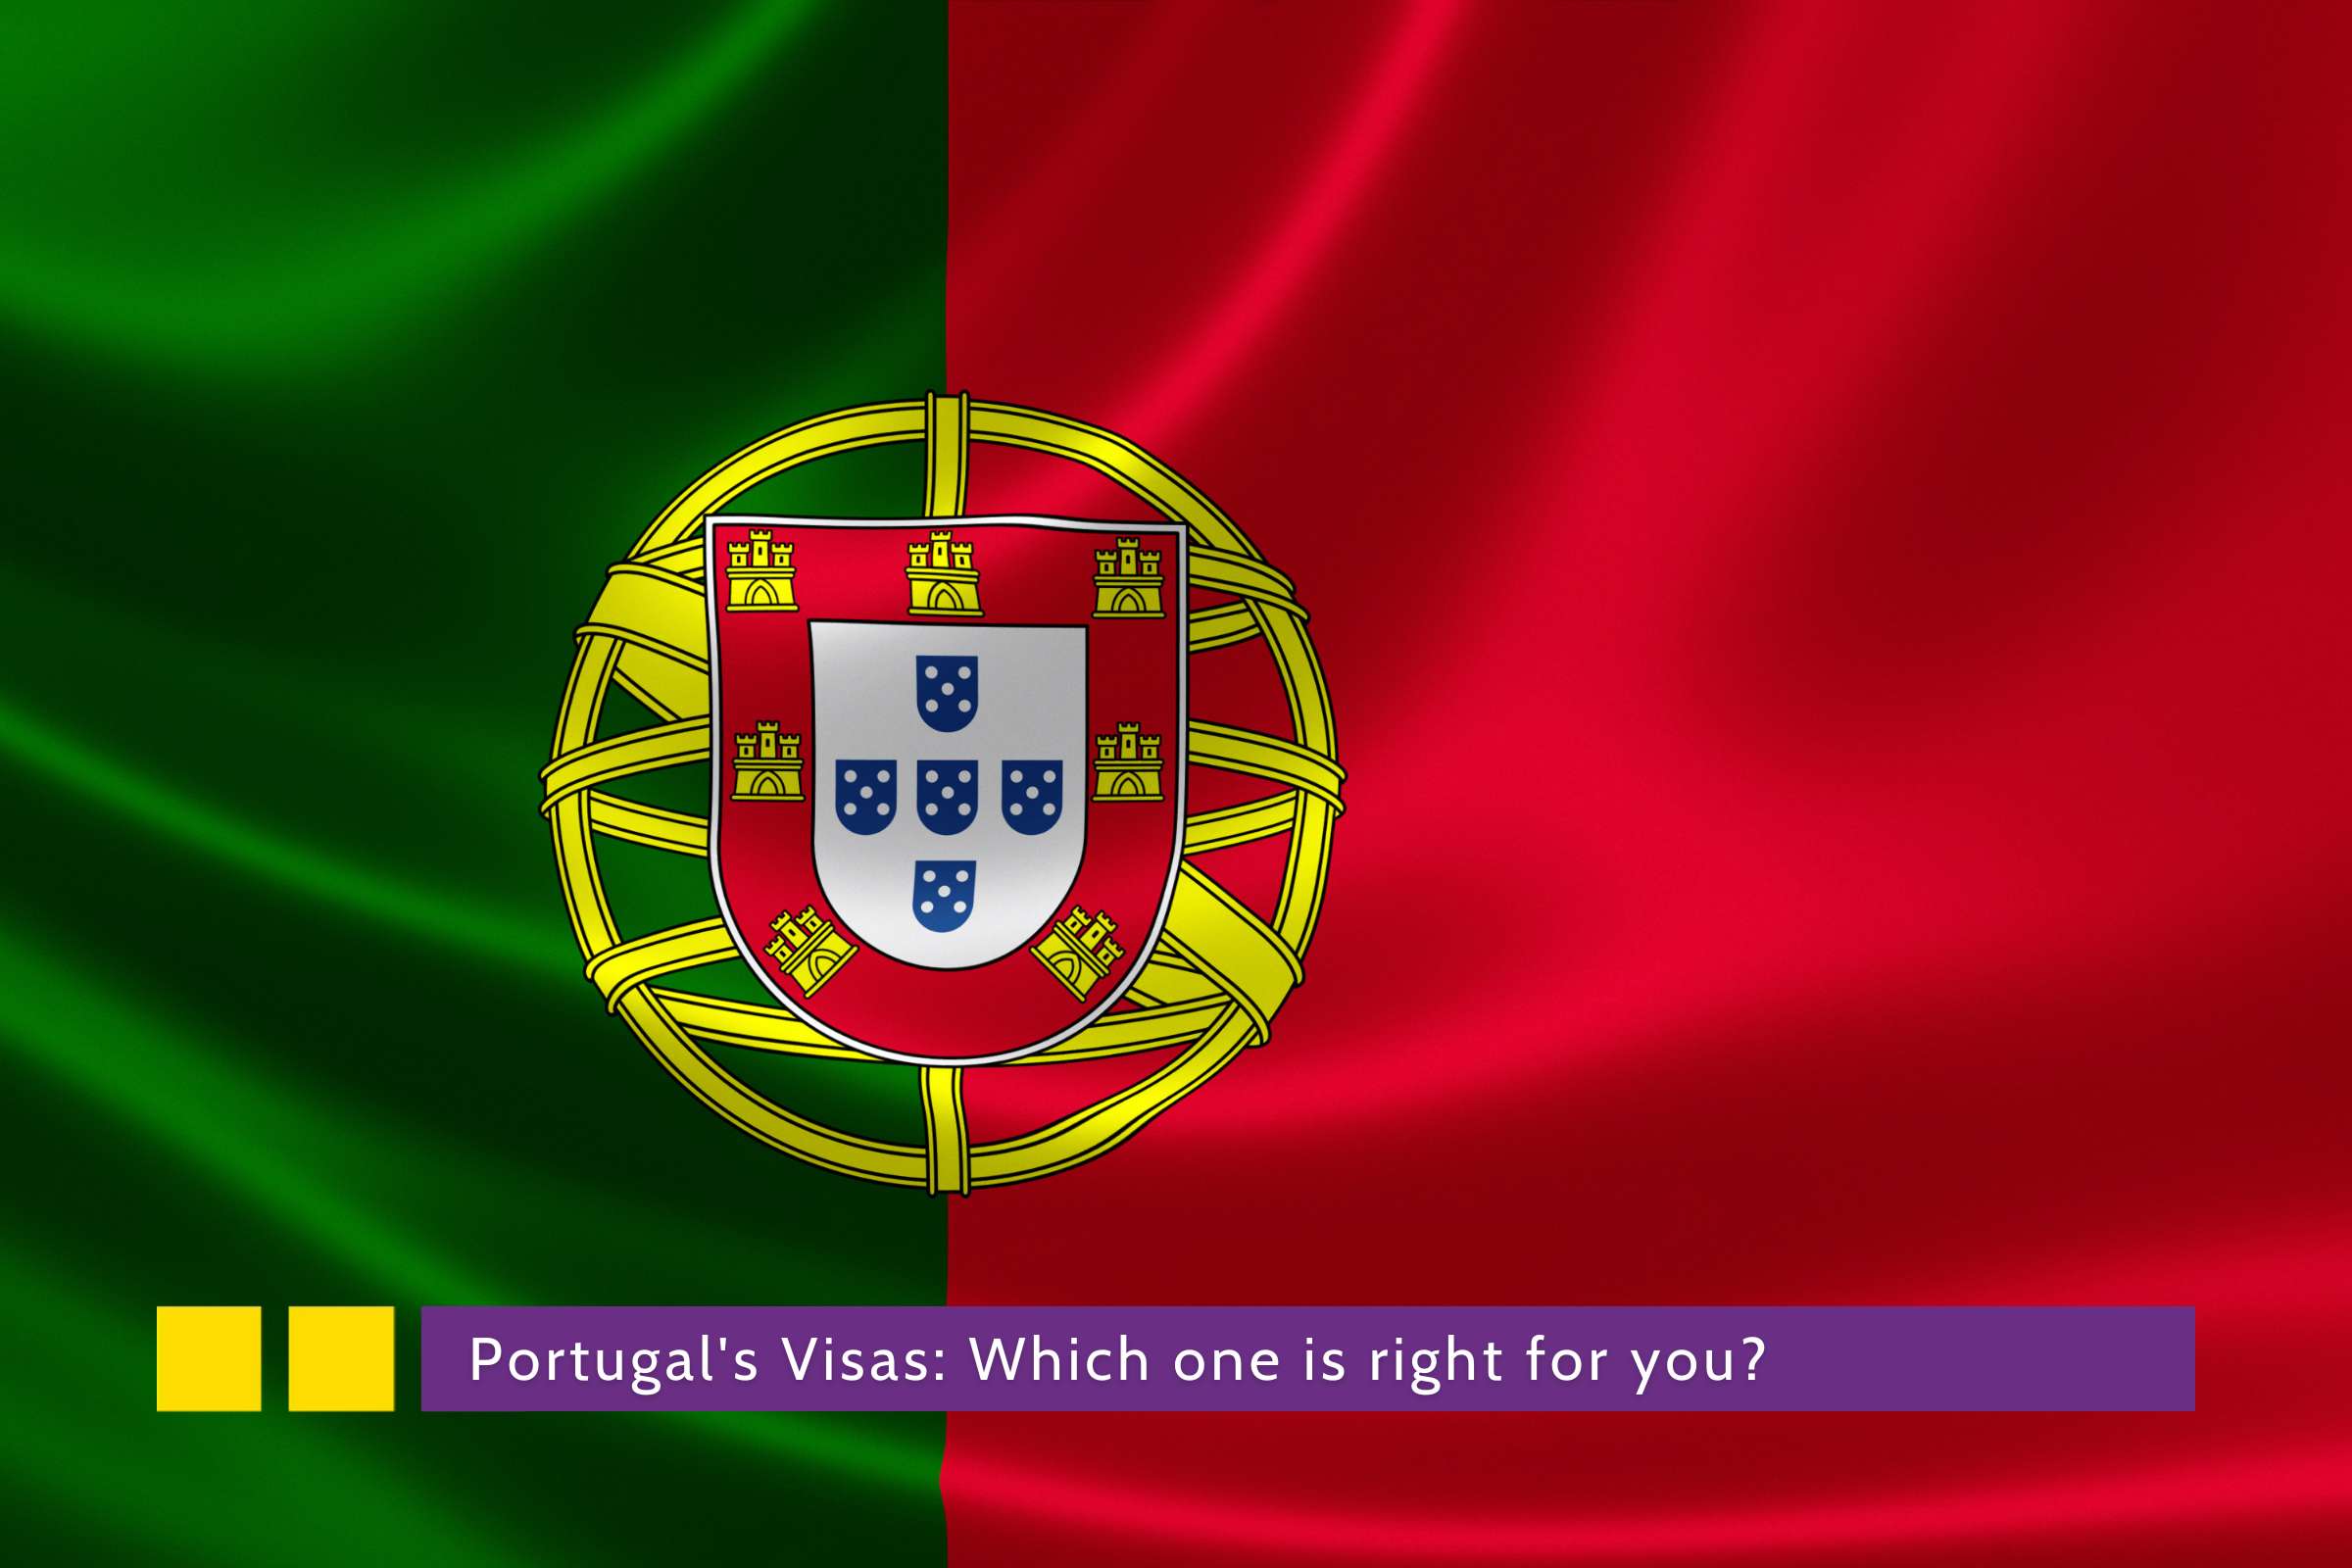 Portugal’s visas: Which one is right for you?